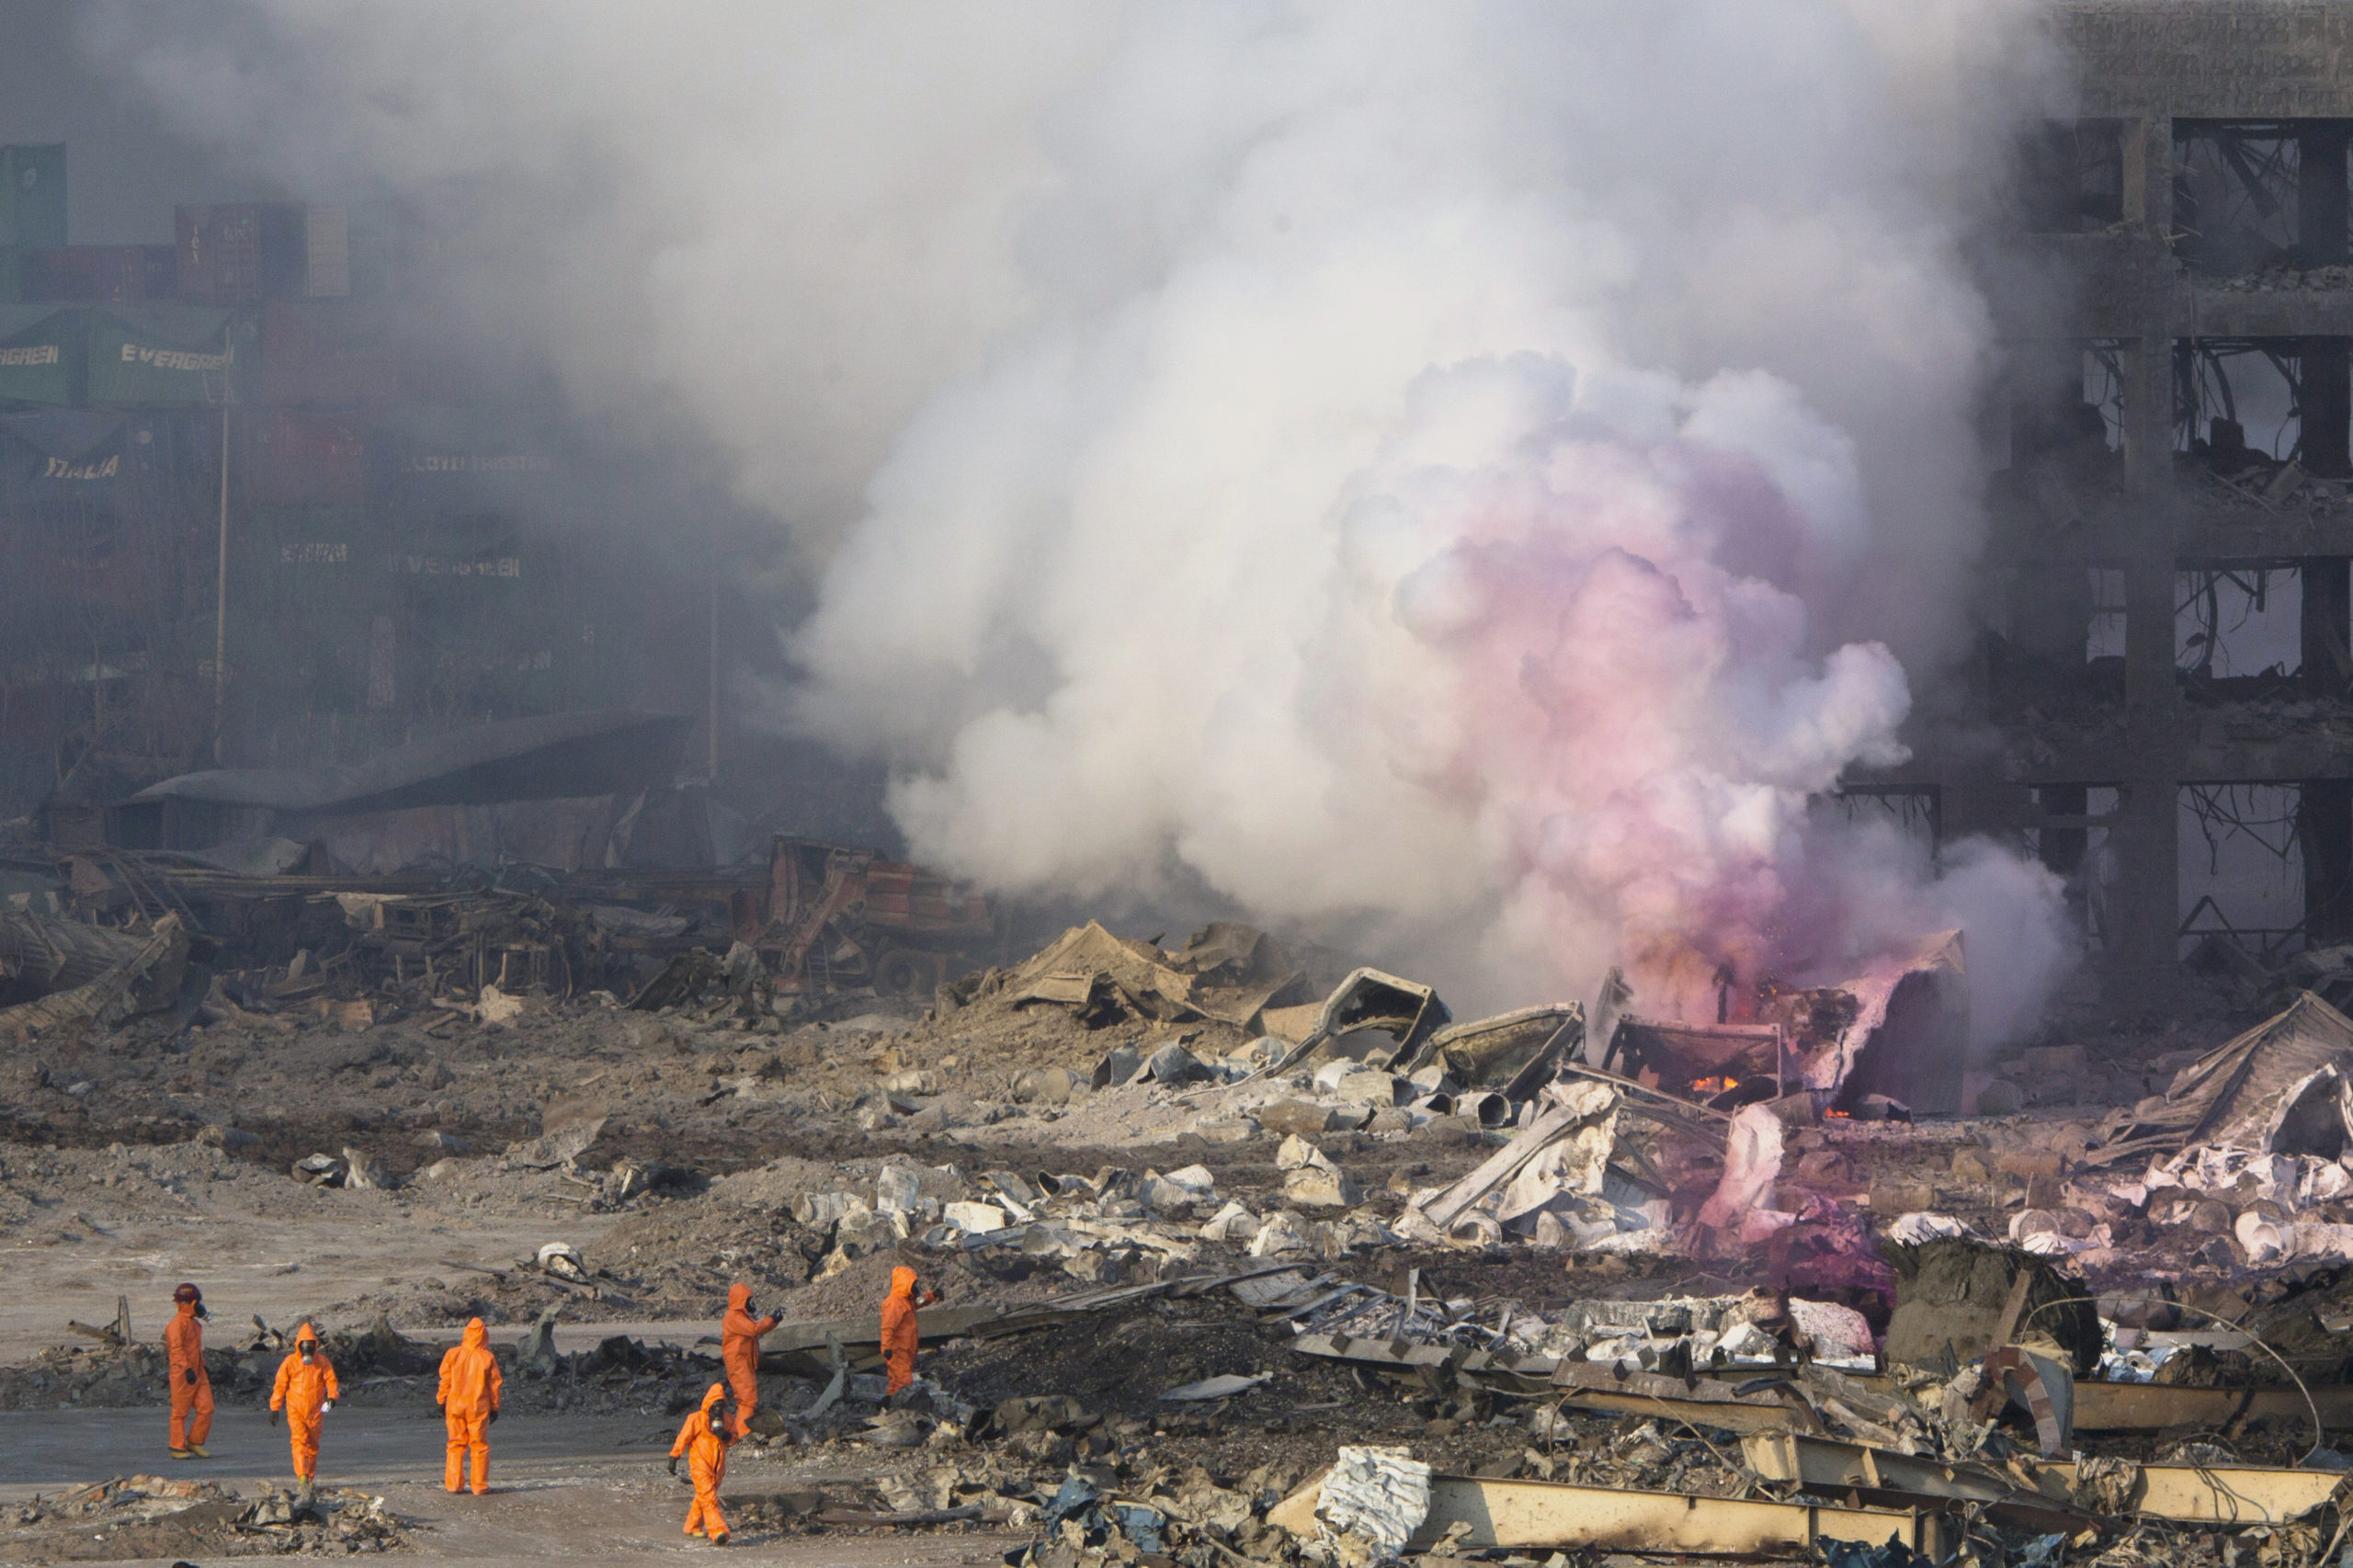 Tianjin Blasts Released So Much Energy They Looked Like Earthquakes